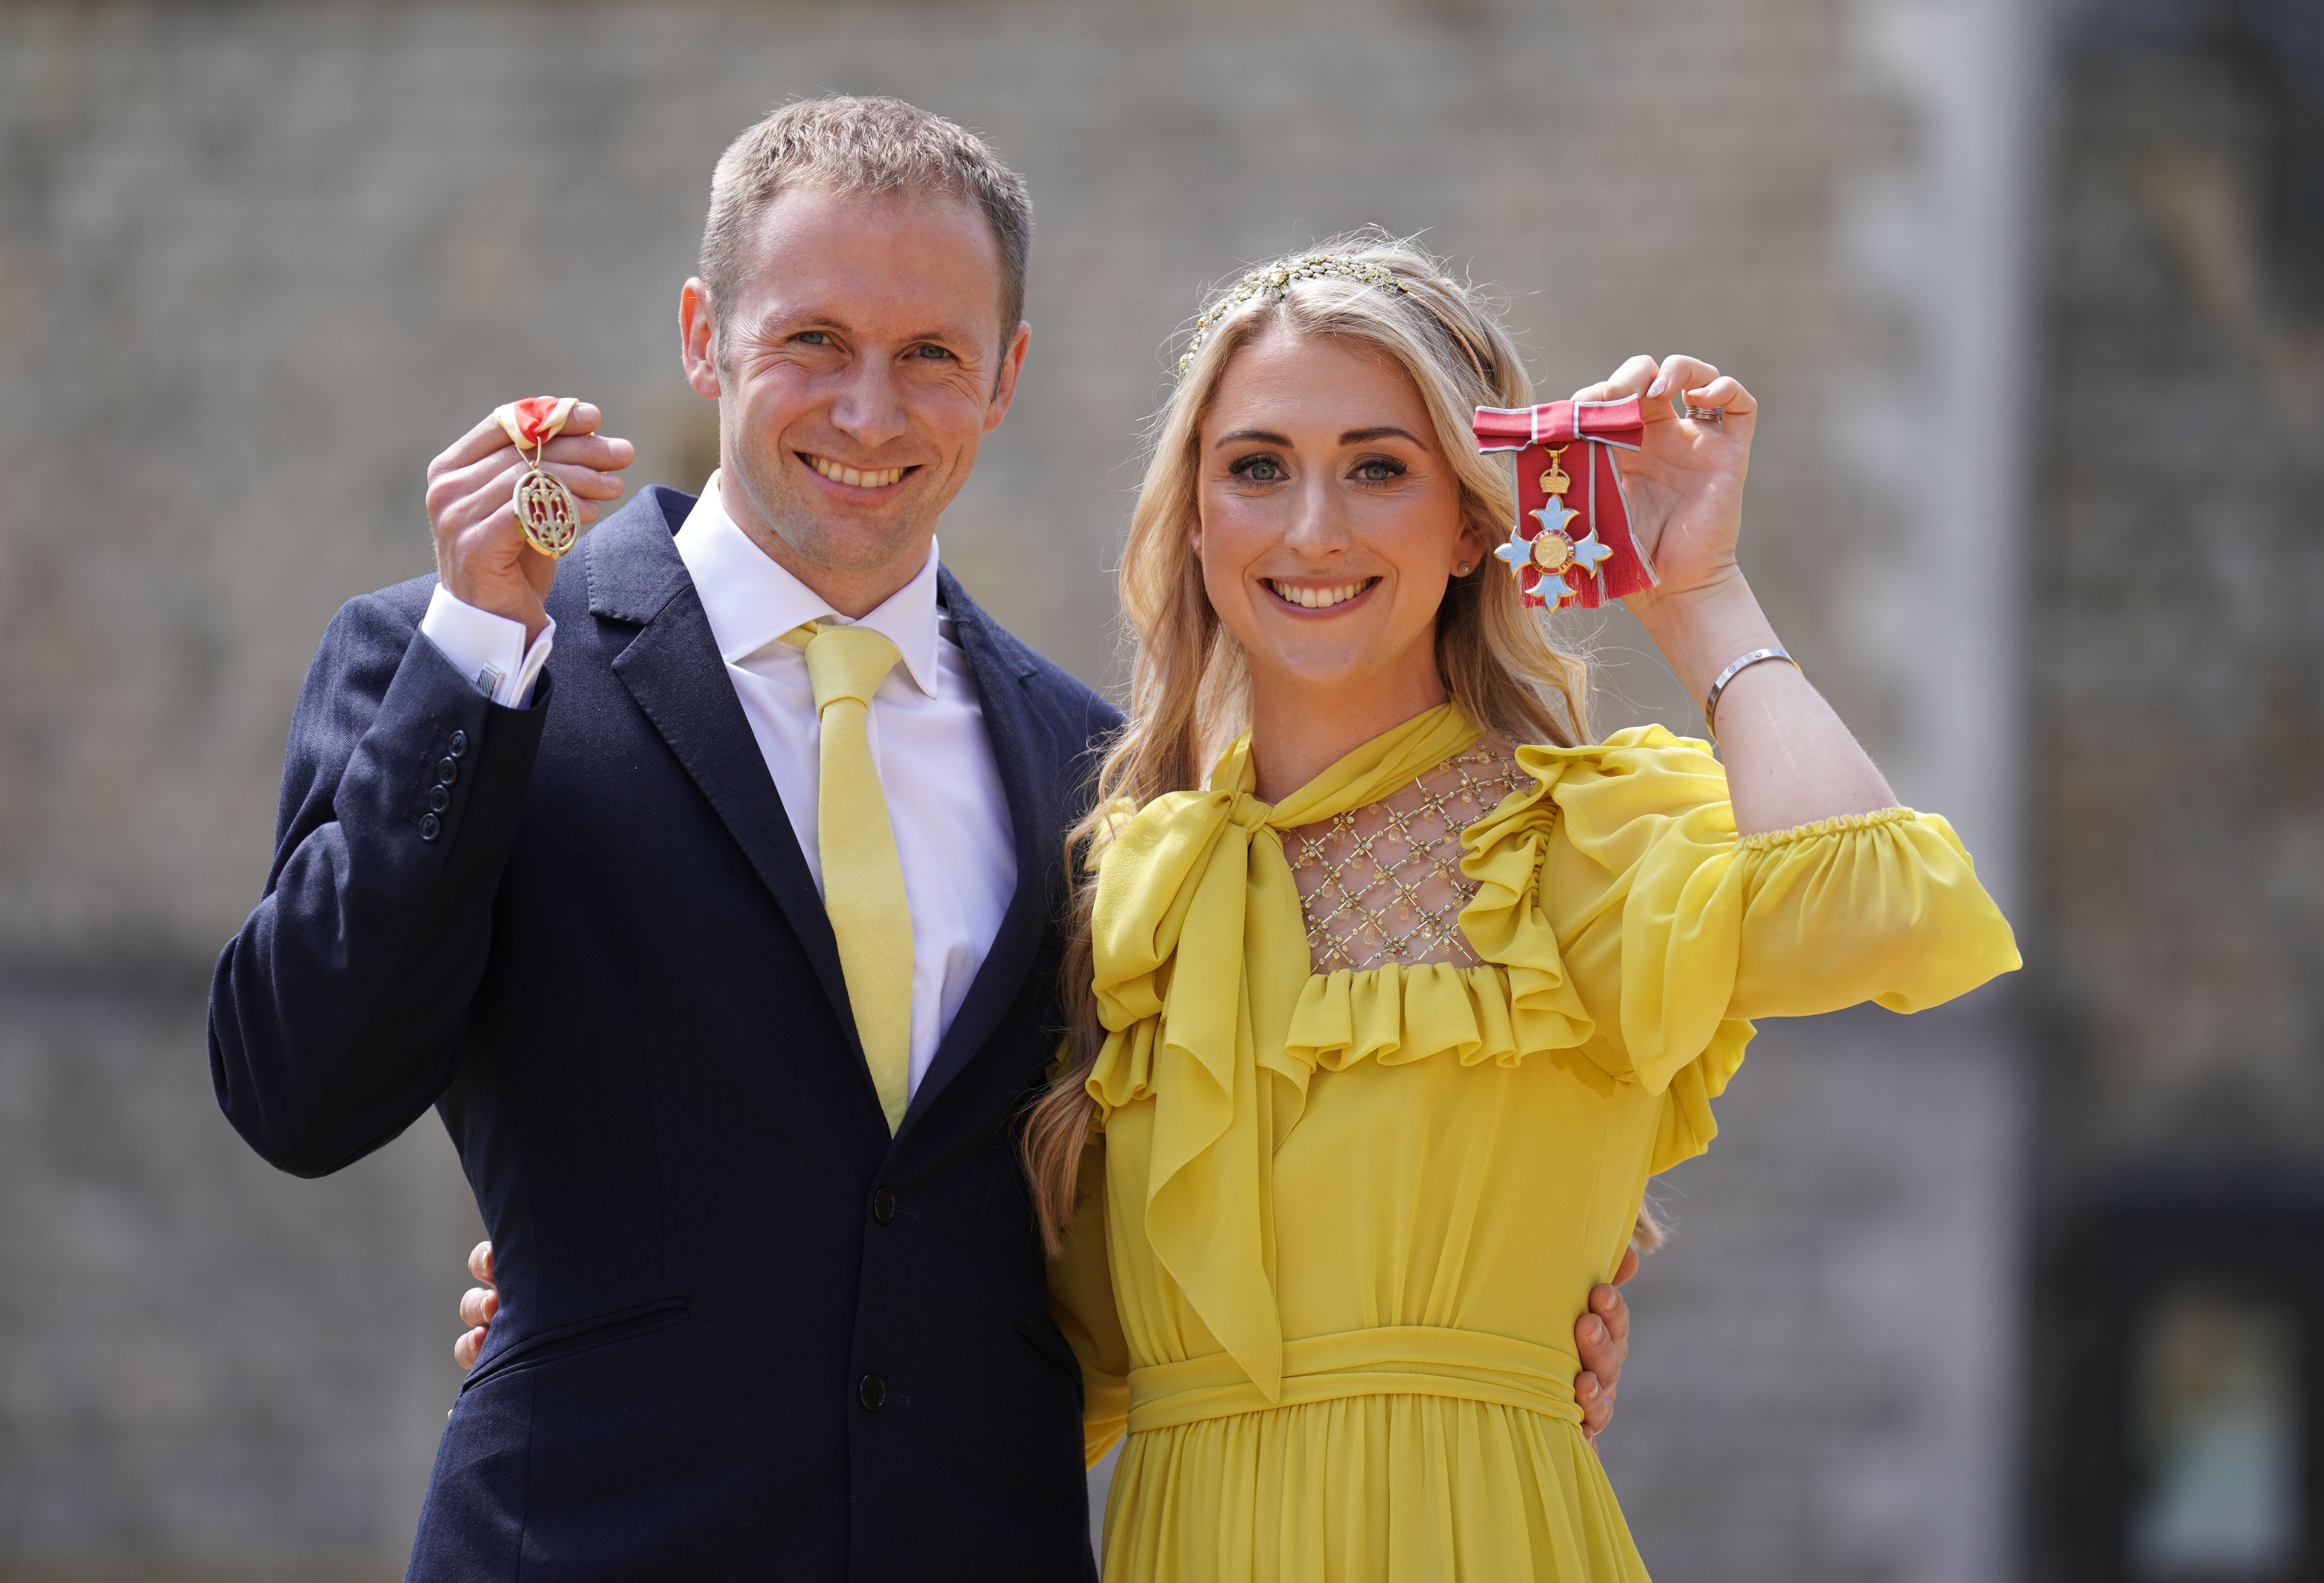 Sir Jason Kenny and Dame Laura Kenny after they received their Knight Bachelor and Dame Commander medals awarded by the Duke of Cambridge during an investiture ceremony at Windsor Castle (Kirsty O’Connor/PA)